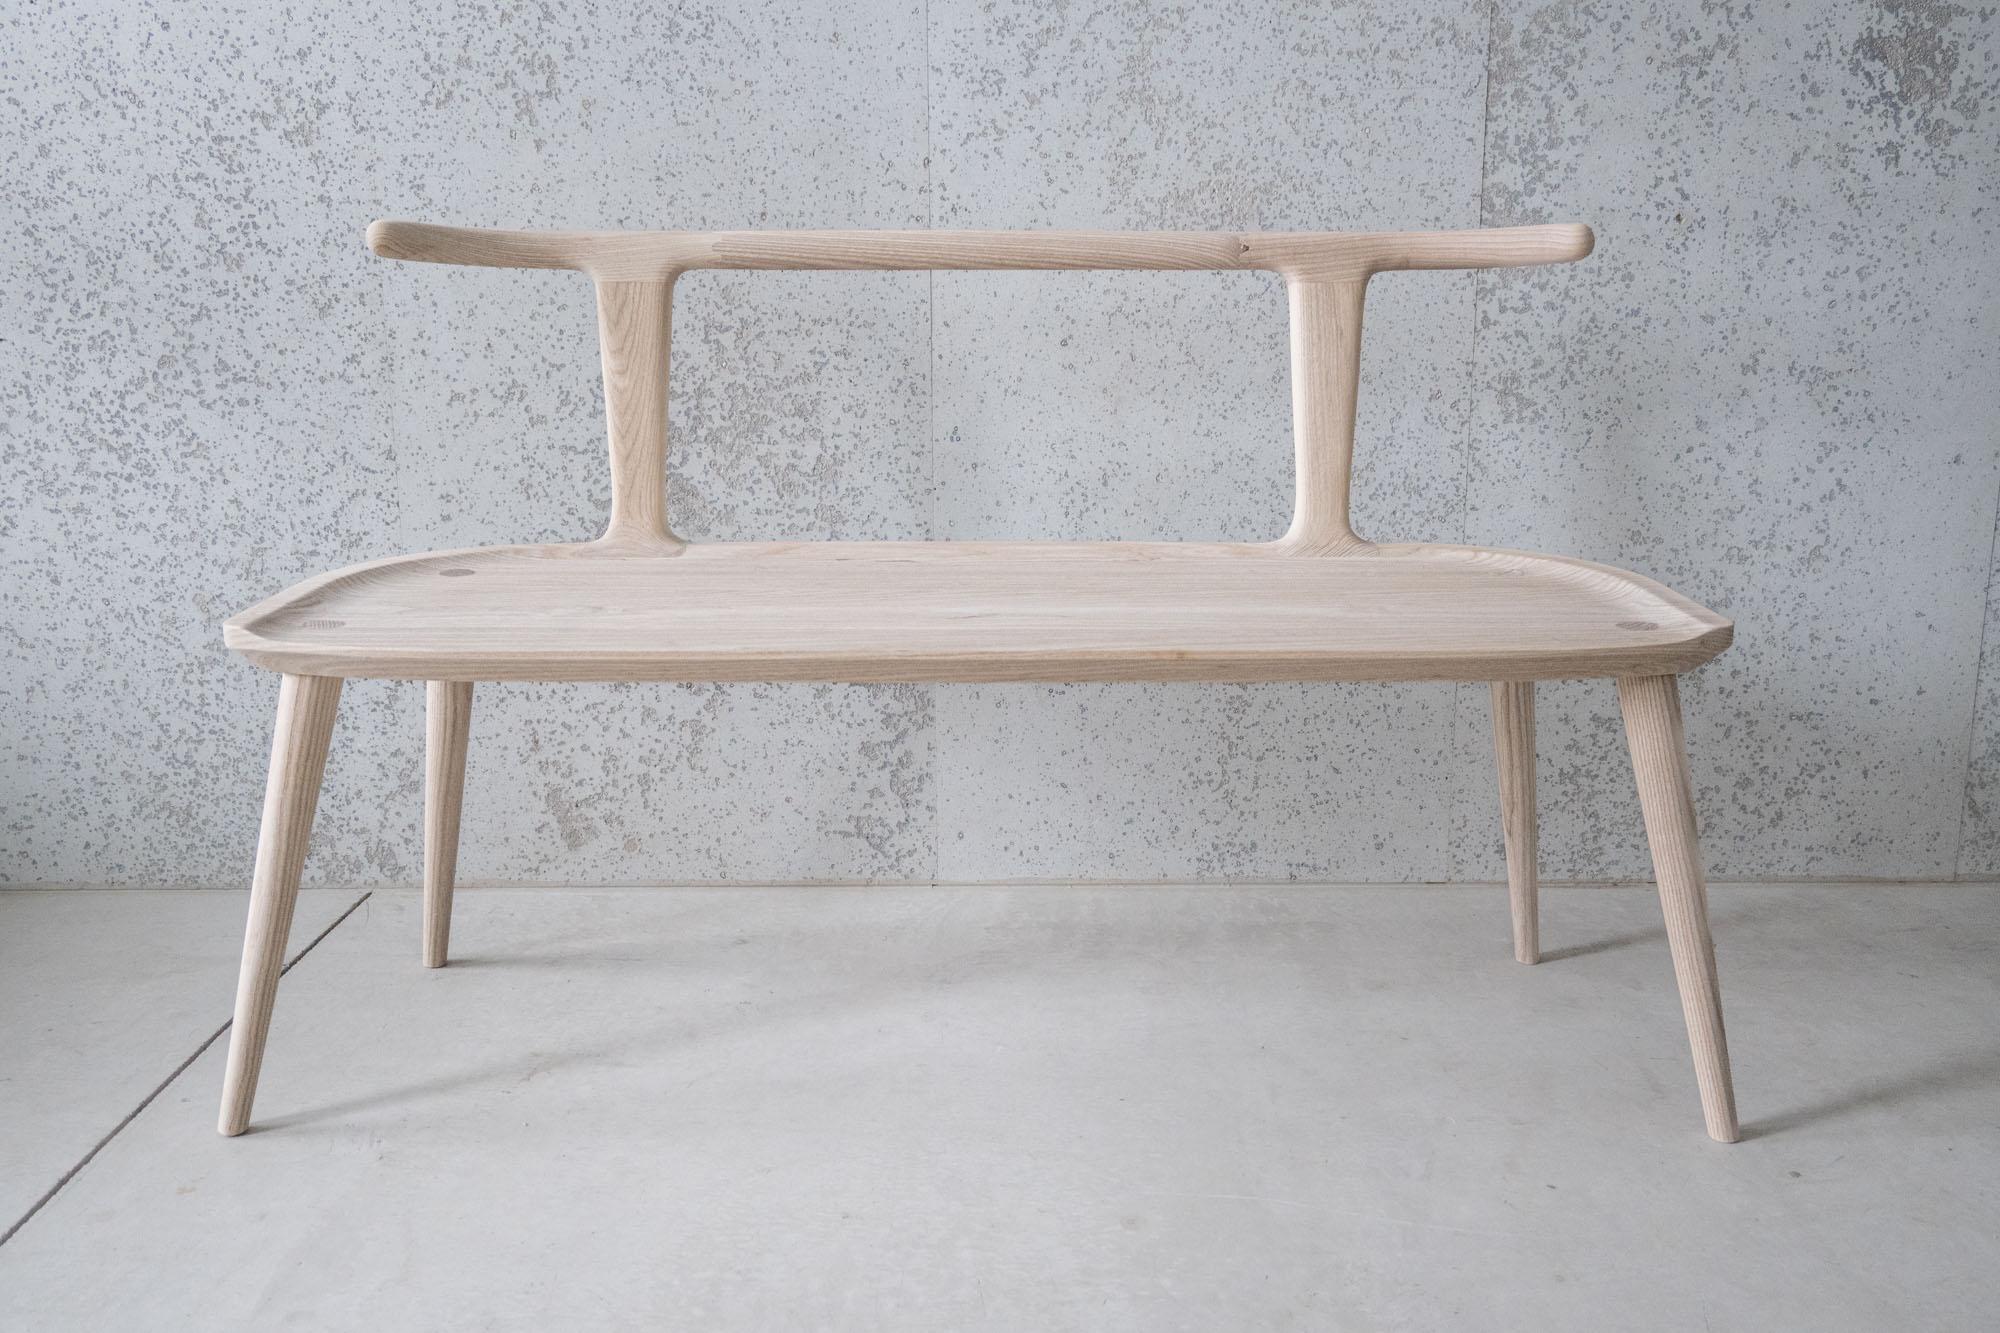 This entryway bench, designed by Justin Nelson for Fernweh Woodworking, evolved out of the Oxbend dining chair, leading also to a matching bar stool. The Oxbend Collection was born from a desire to create seating that is comfortable, organic, and